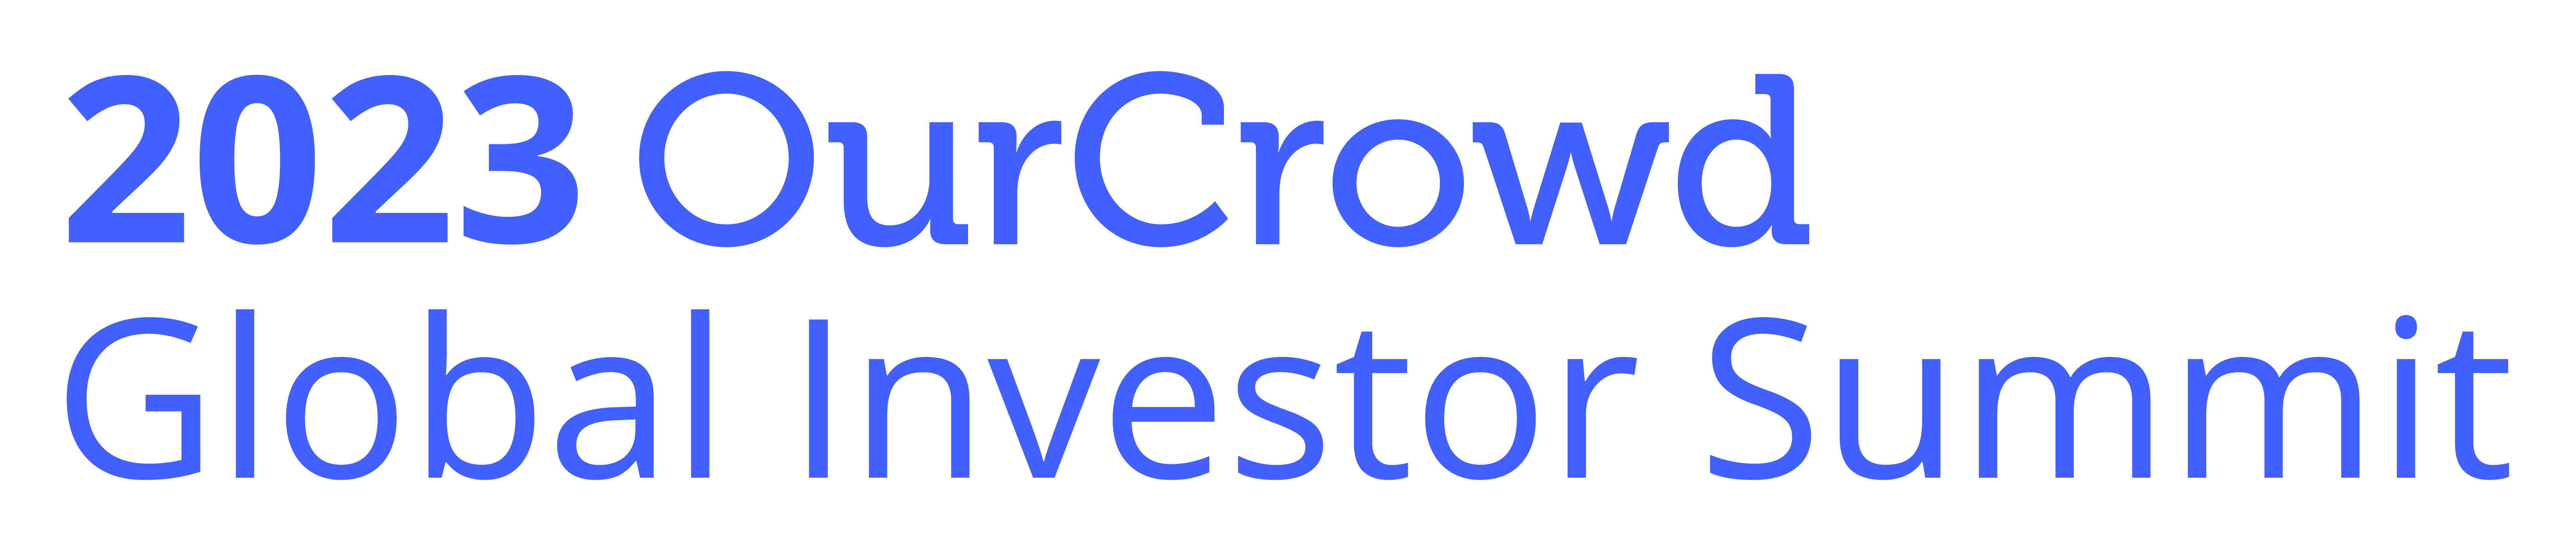 OurCrowd Global Investor Summit